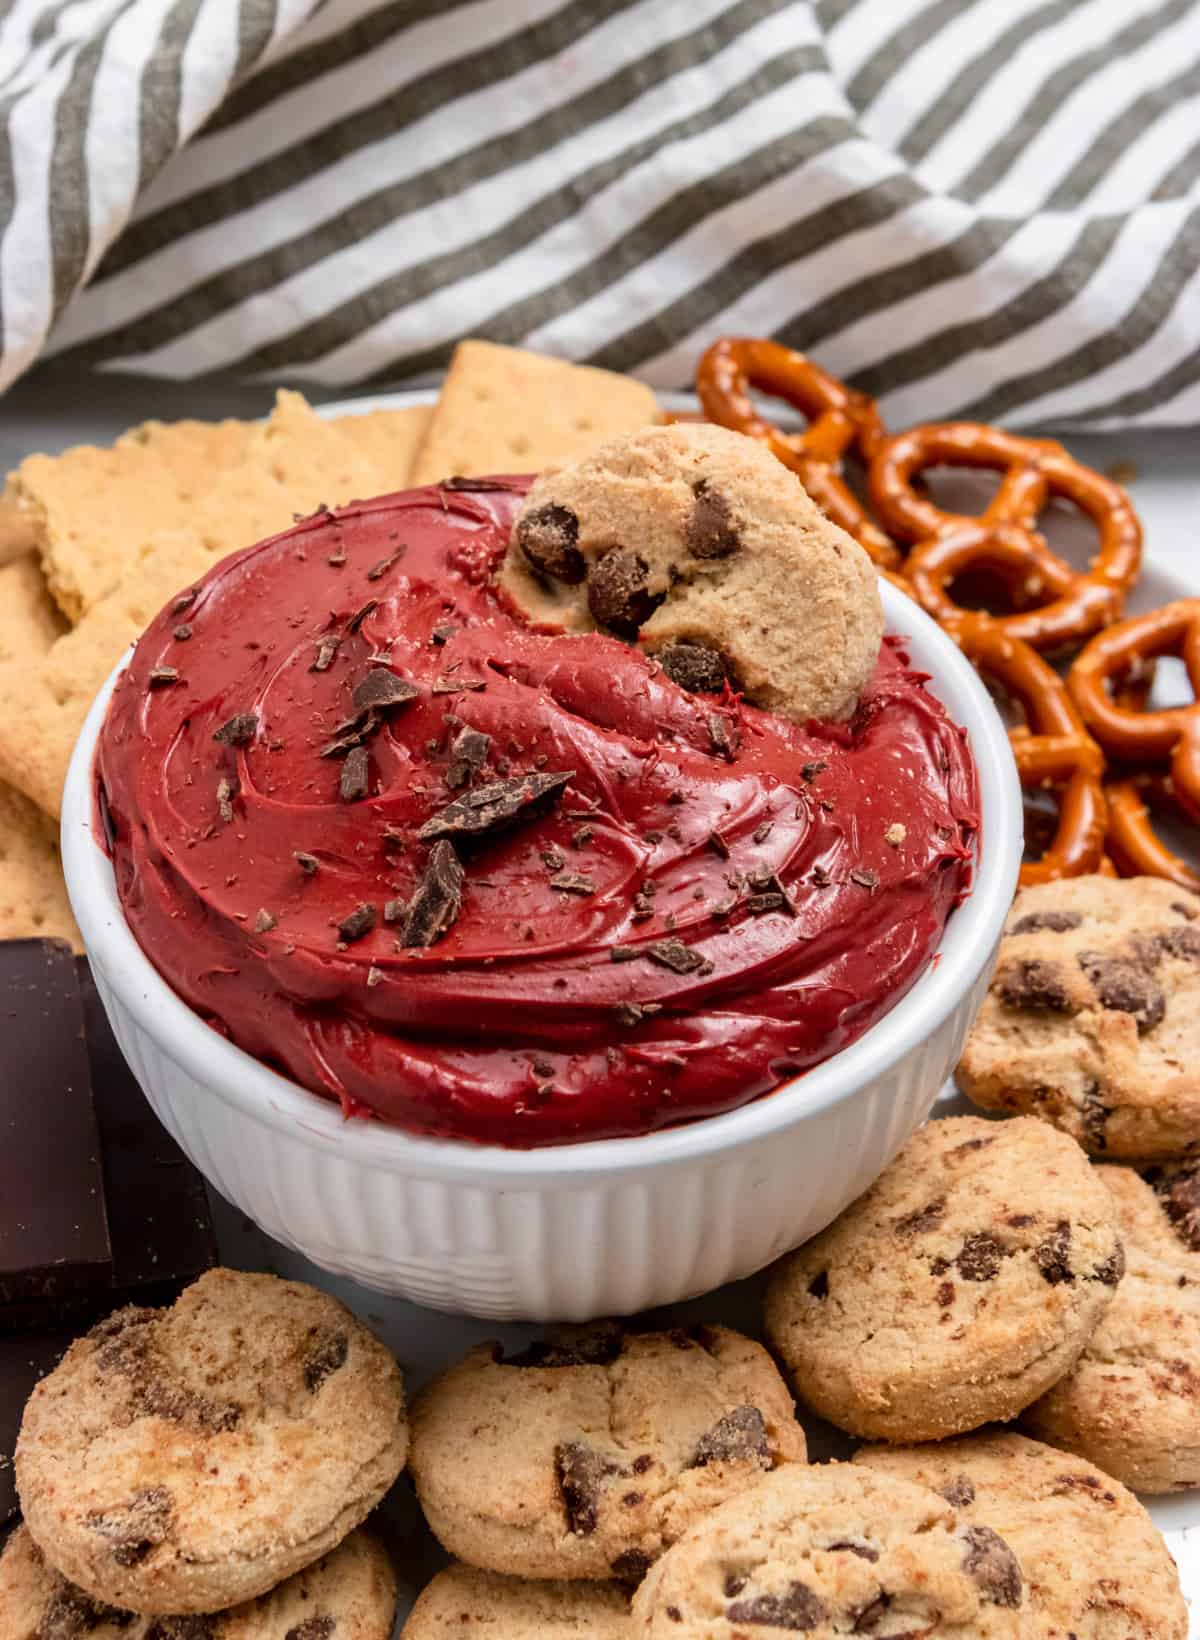 Red velvet cheesecake dip in white bowl with pretzels, cookies etc.